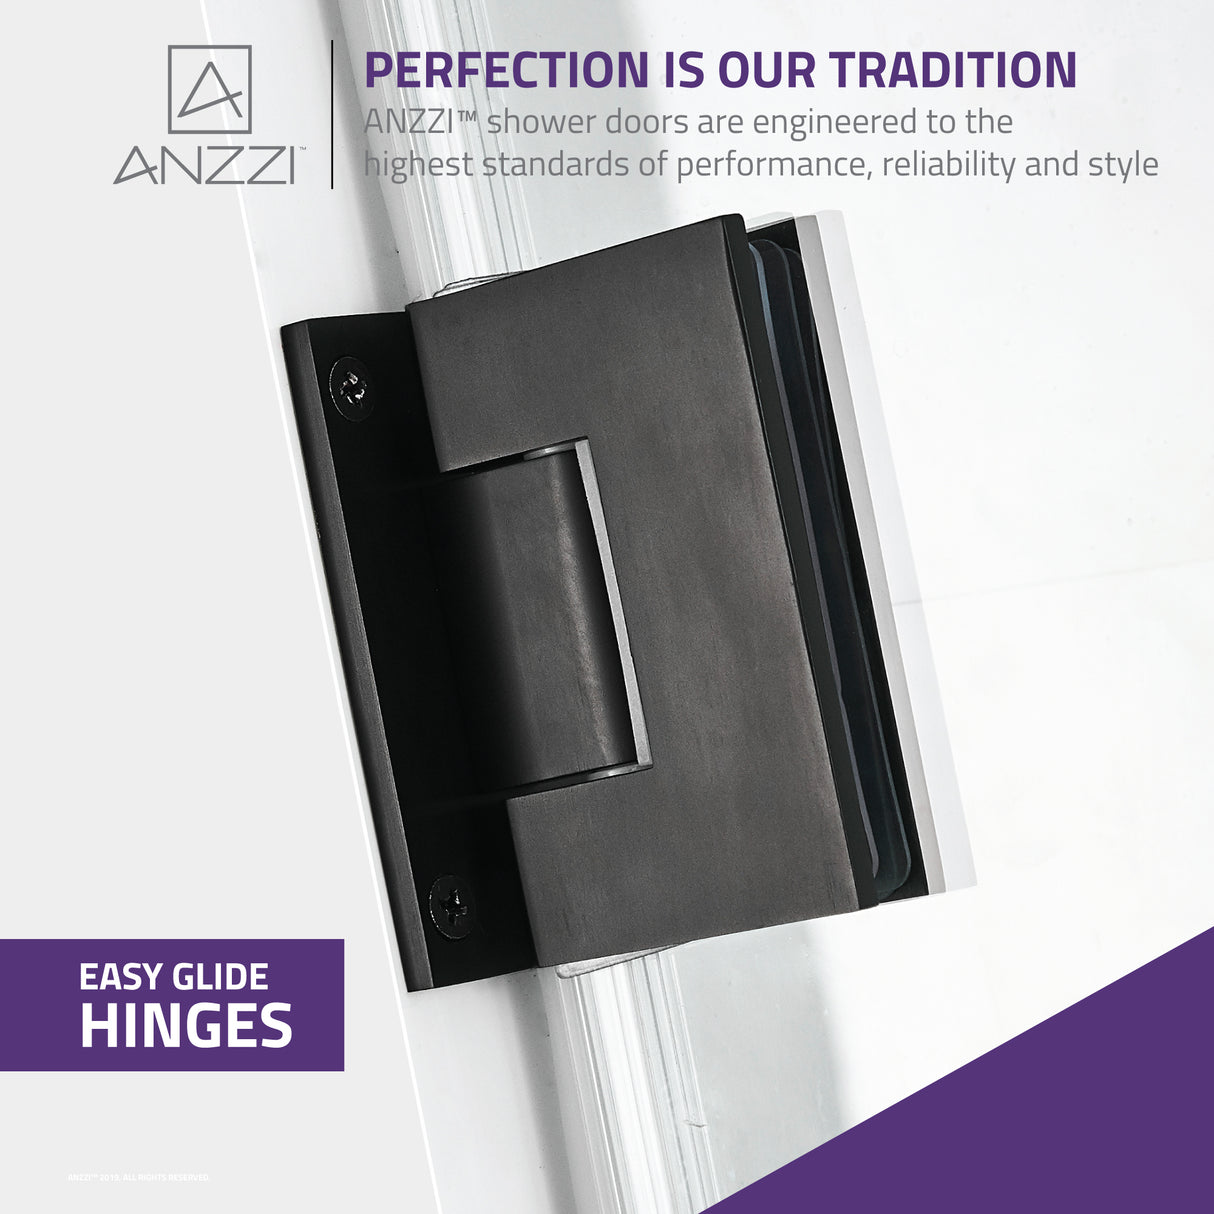 ANZZI SD-AZ8075-01MBR Series 24 in. by 72 in. Frameless Hinged Shower Door in Matte Black with Handle